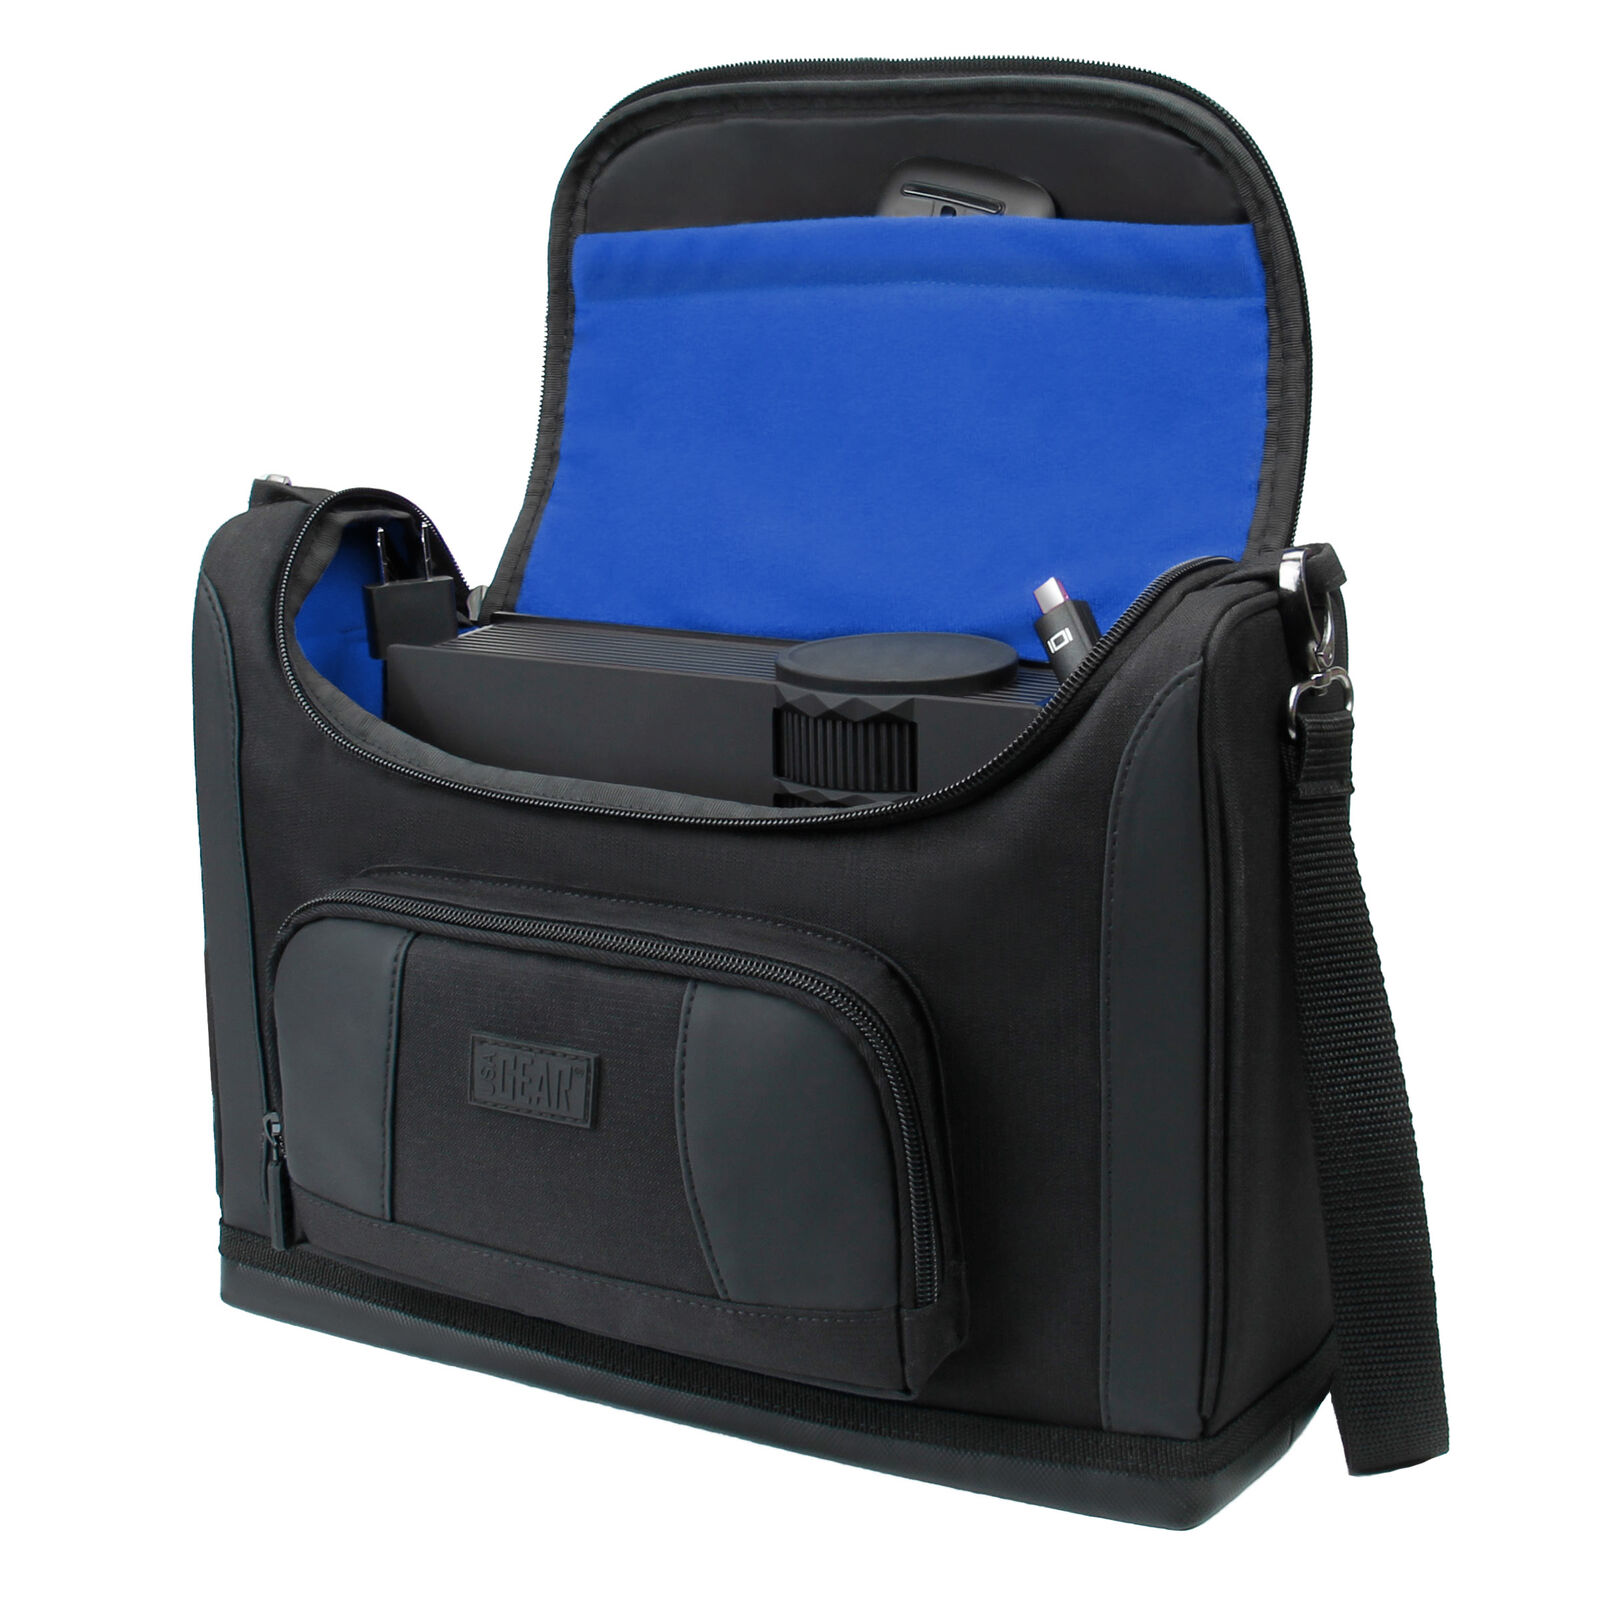 Projector Bag with Customizable Dividers, Accessory Pockets, & Shoulder Strap